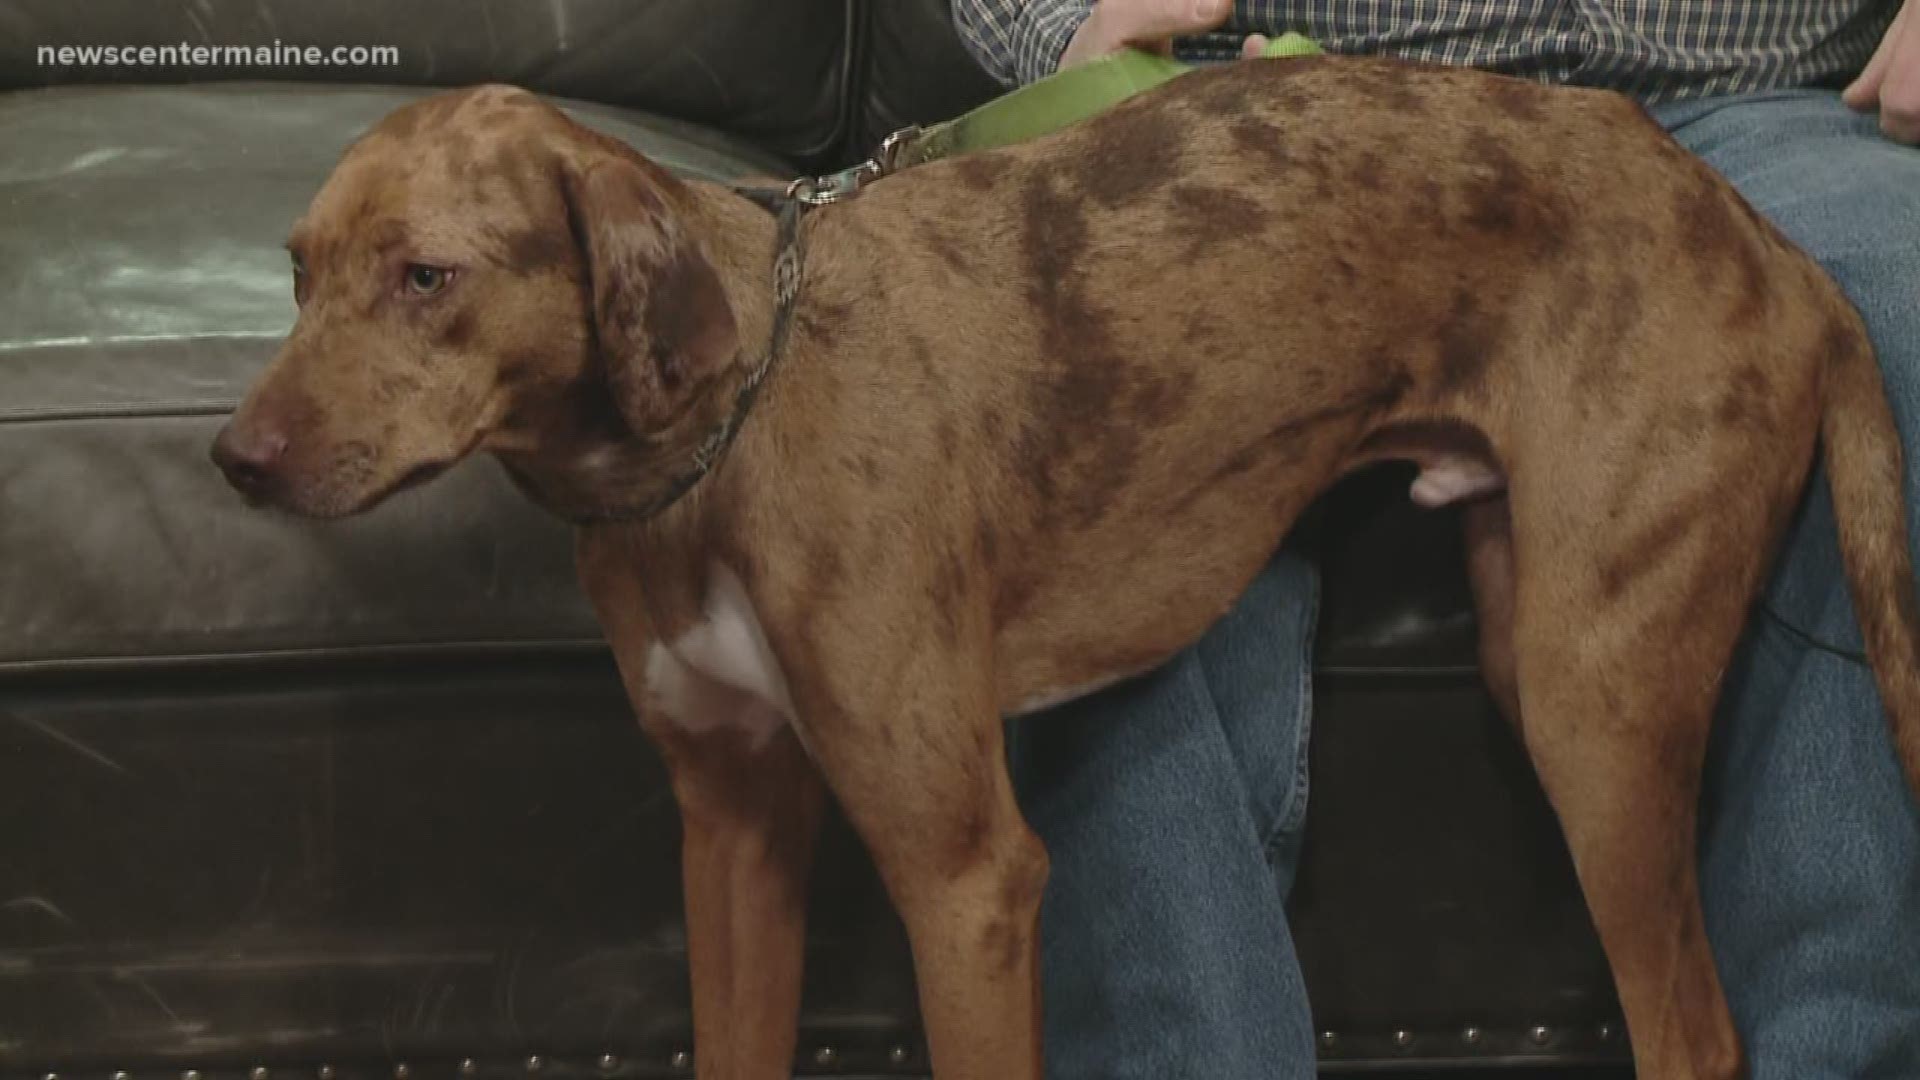 Tito is a Catahoula mix. He's available for adoption at Passion for Pets Rescue.